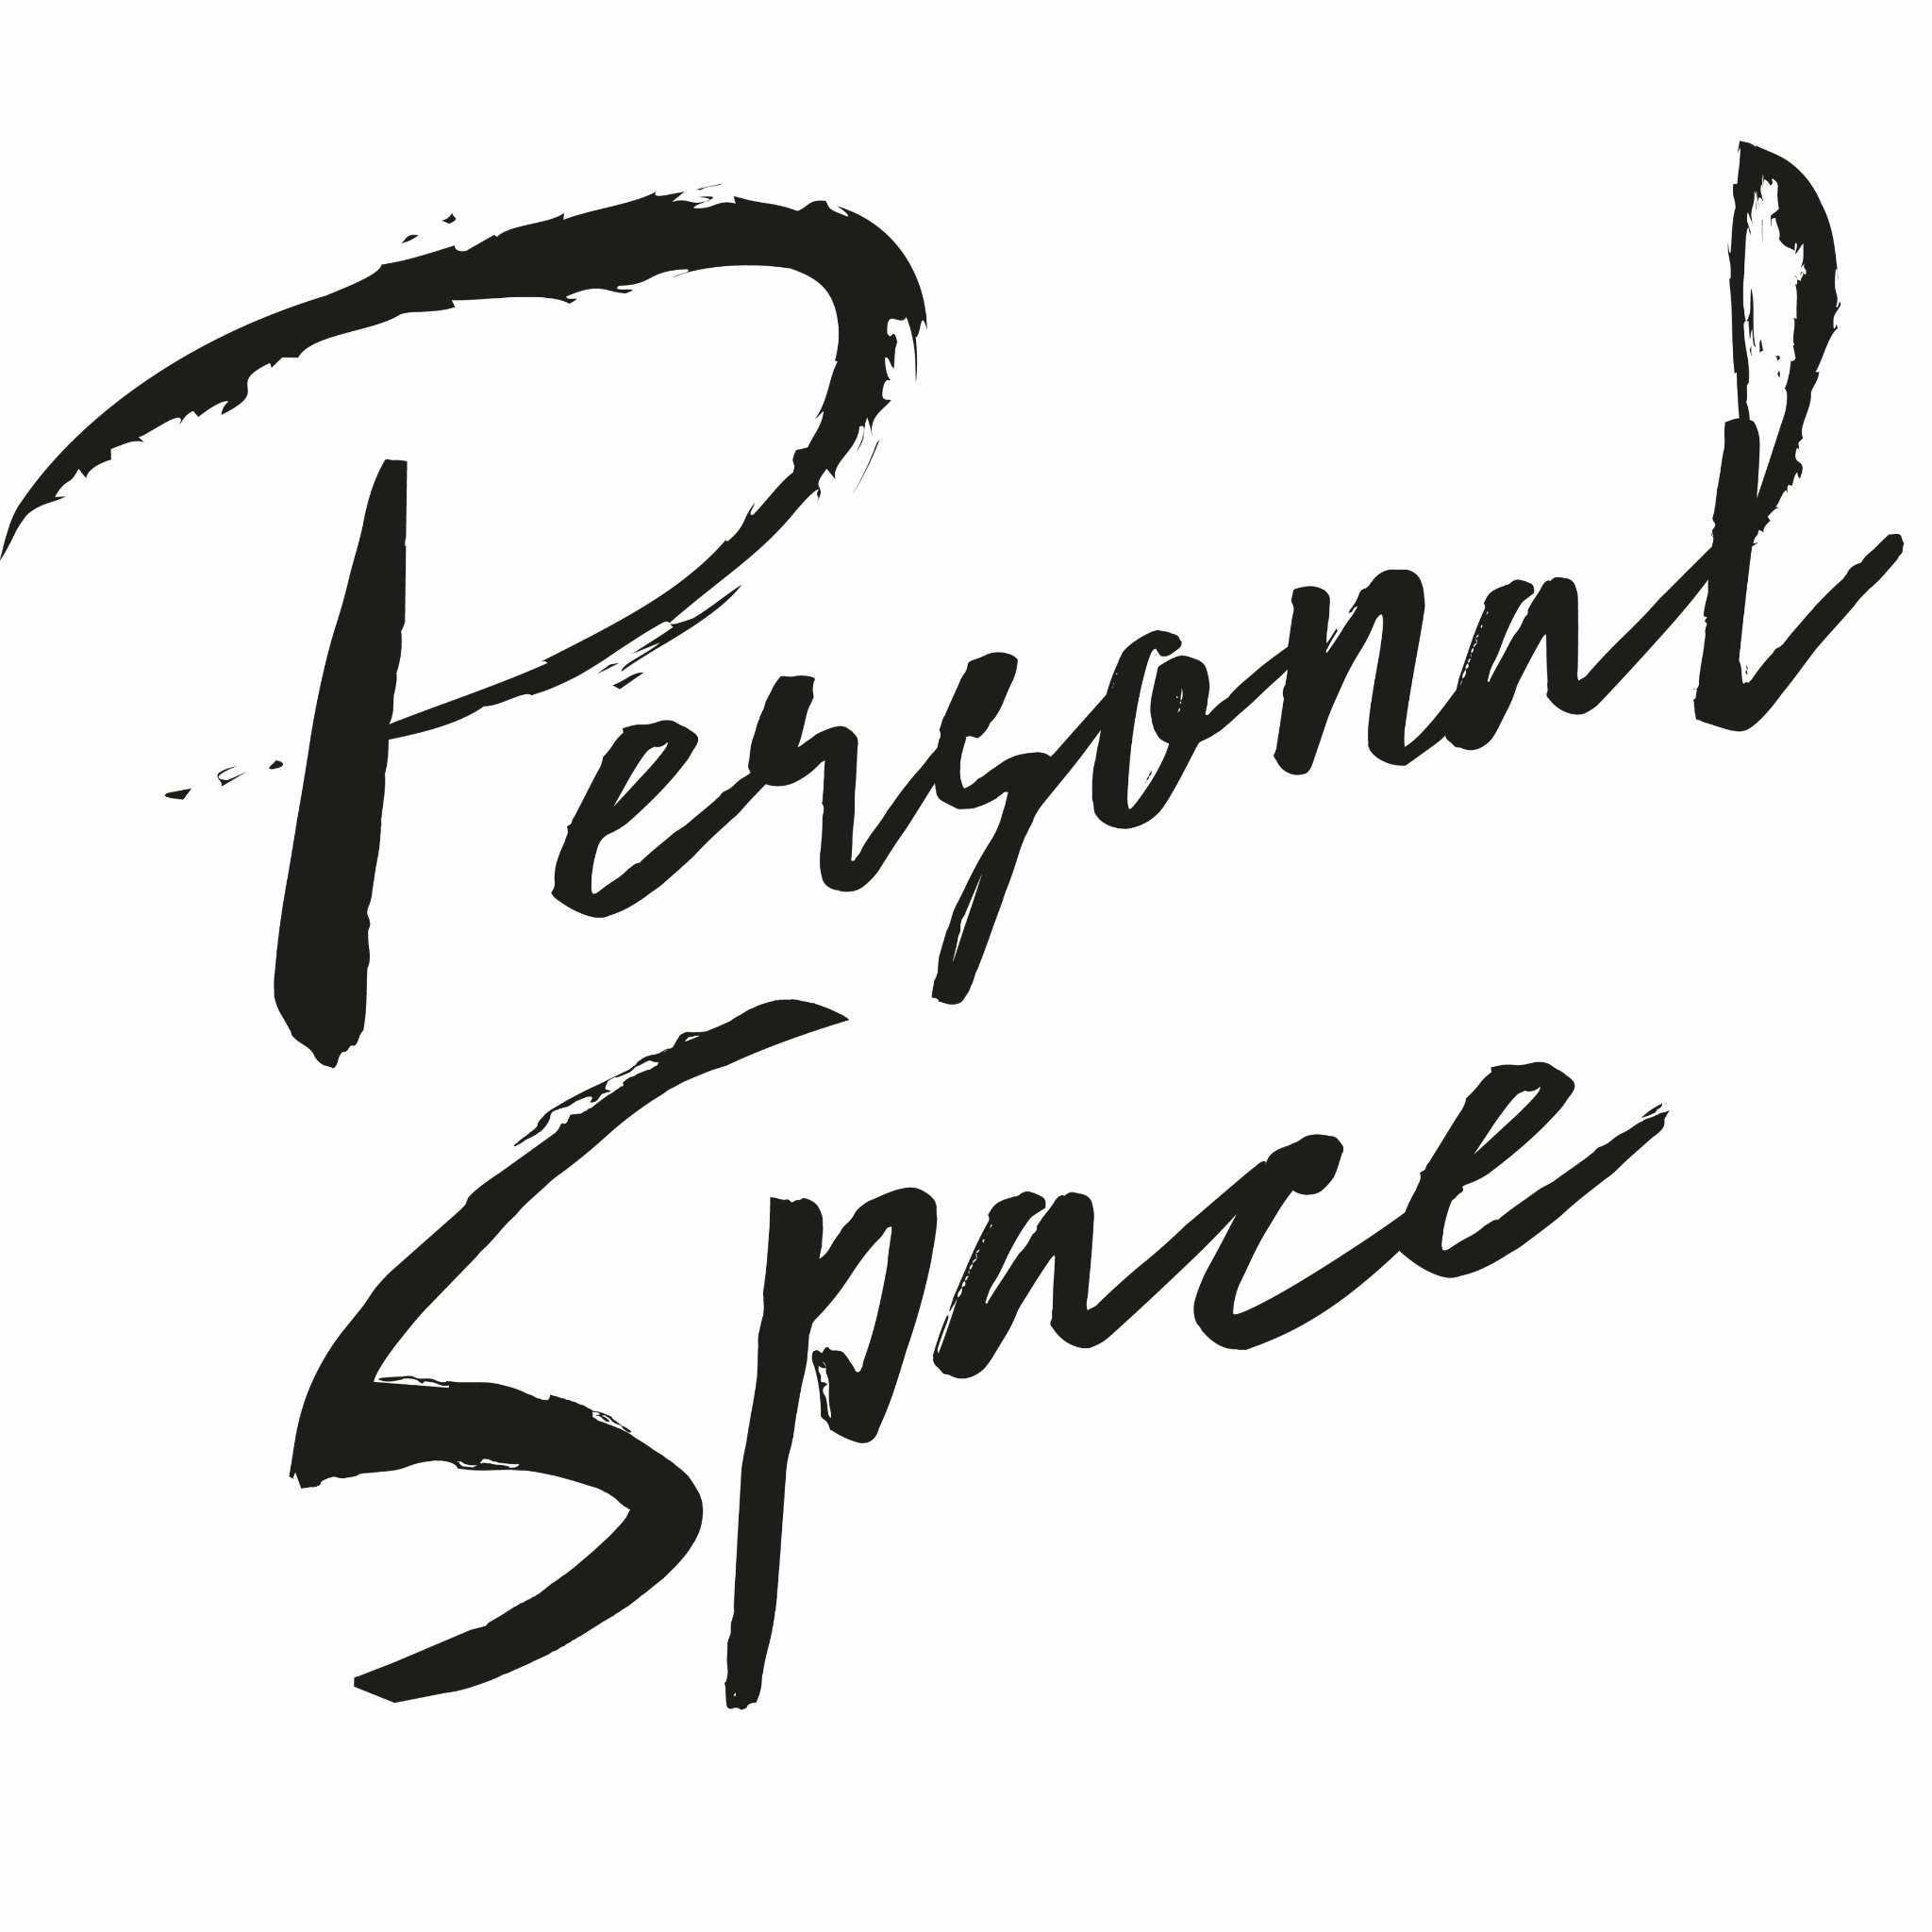 Personal Space MB